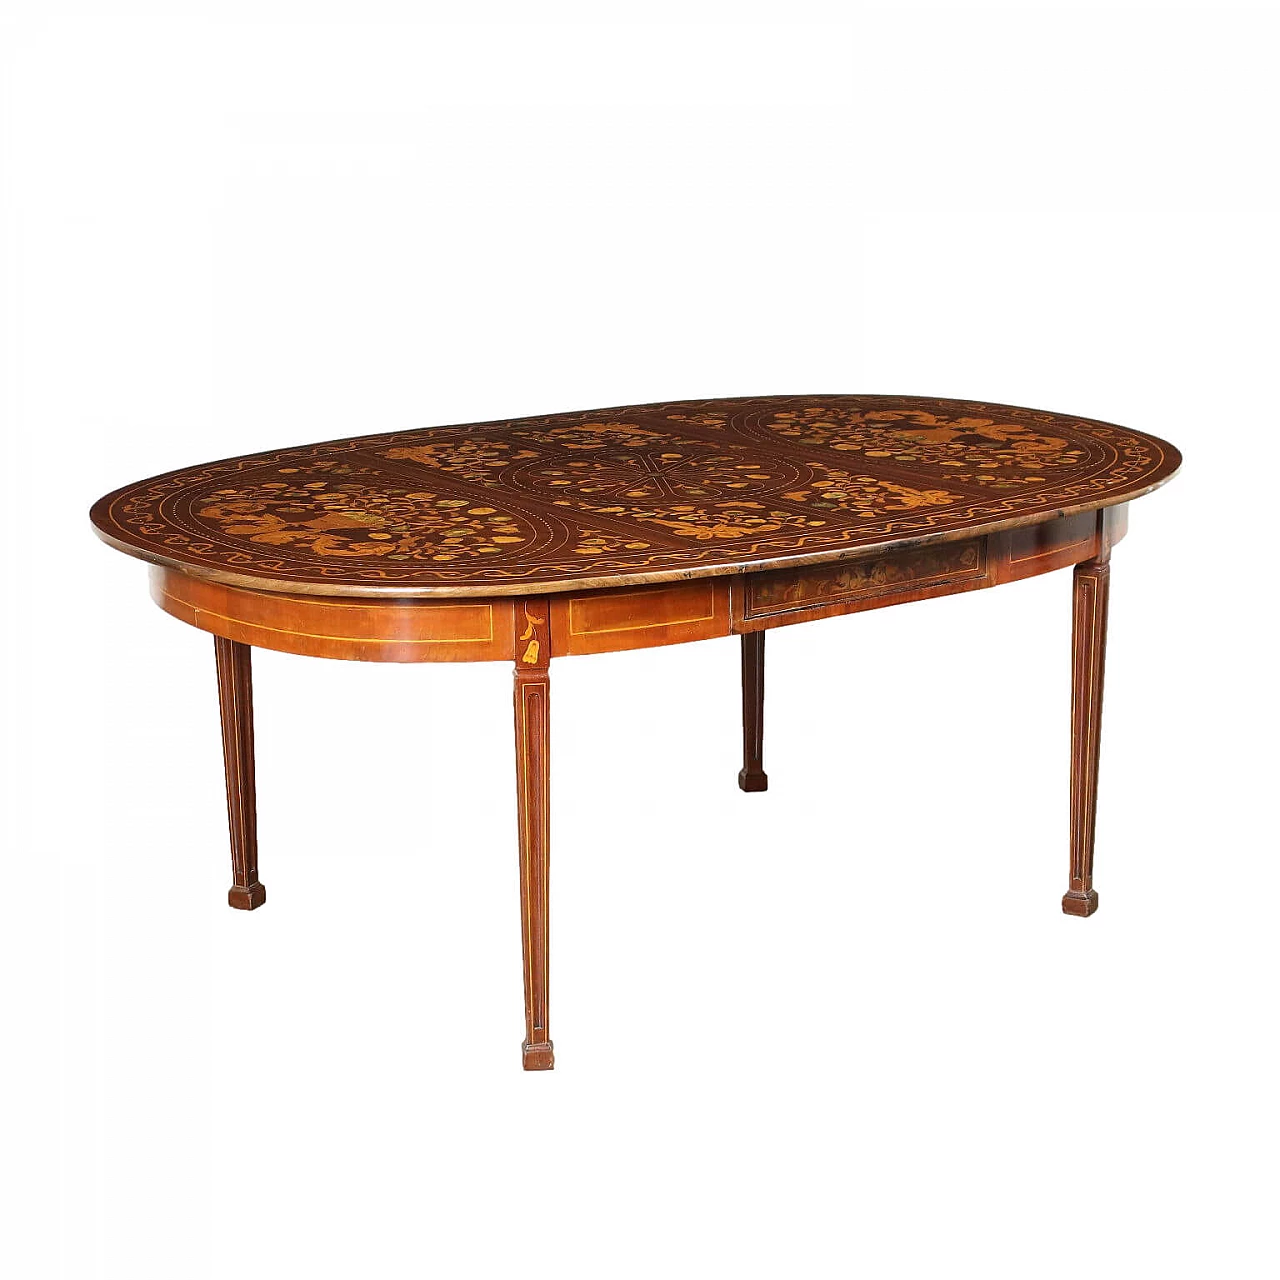 Dutch oval mahogany table inlaid with floral motifs, 19th century 1428621